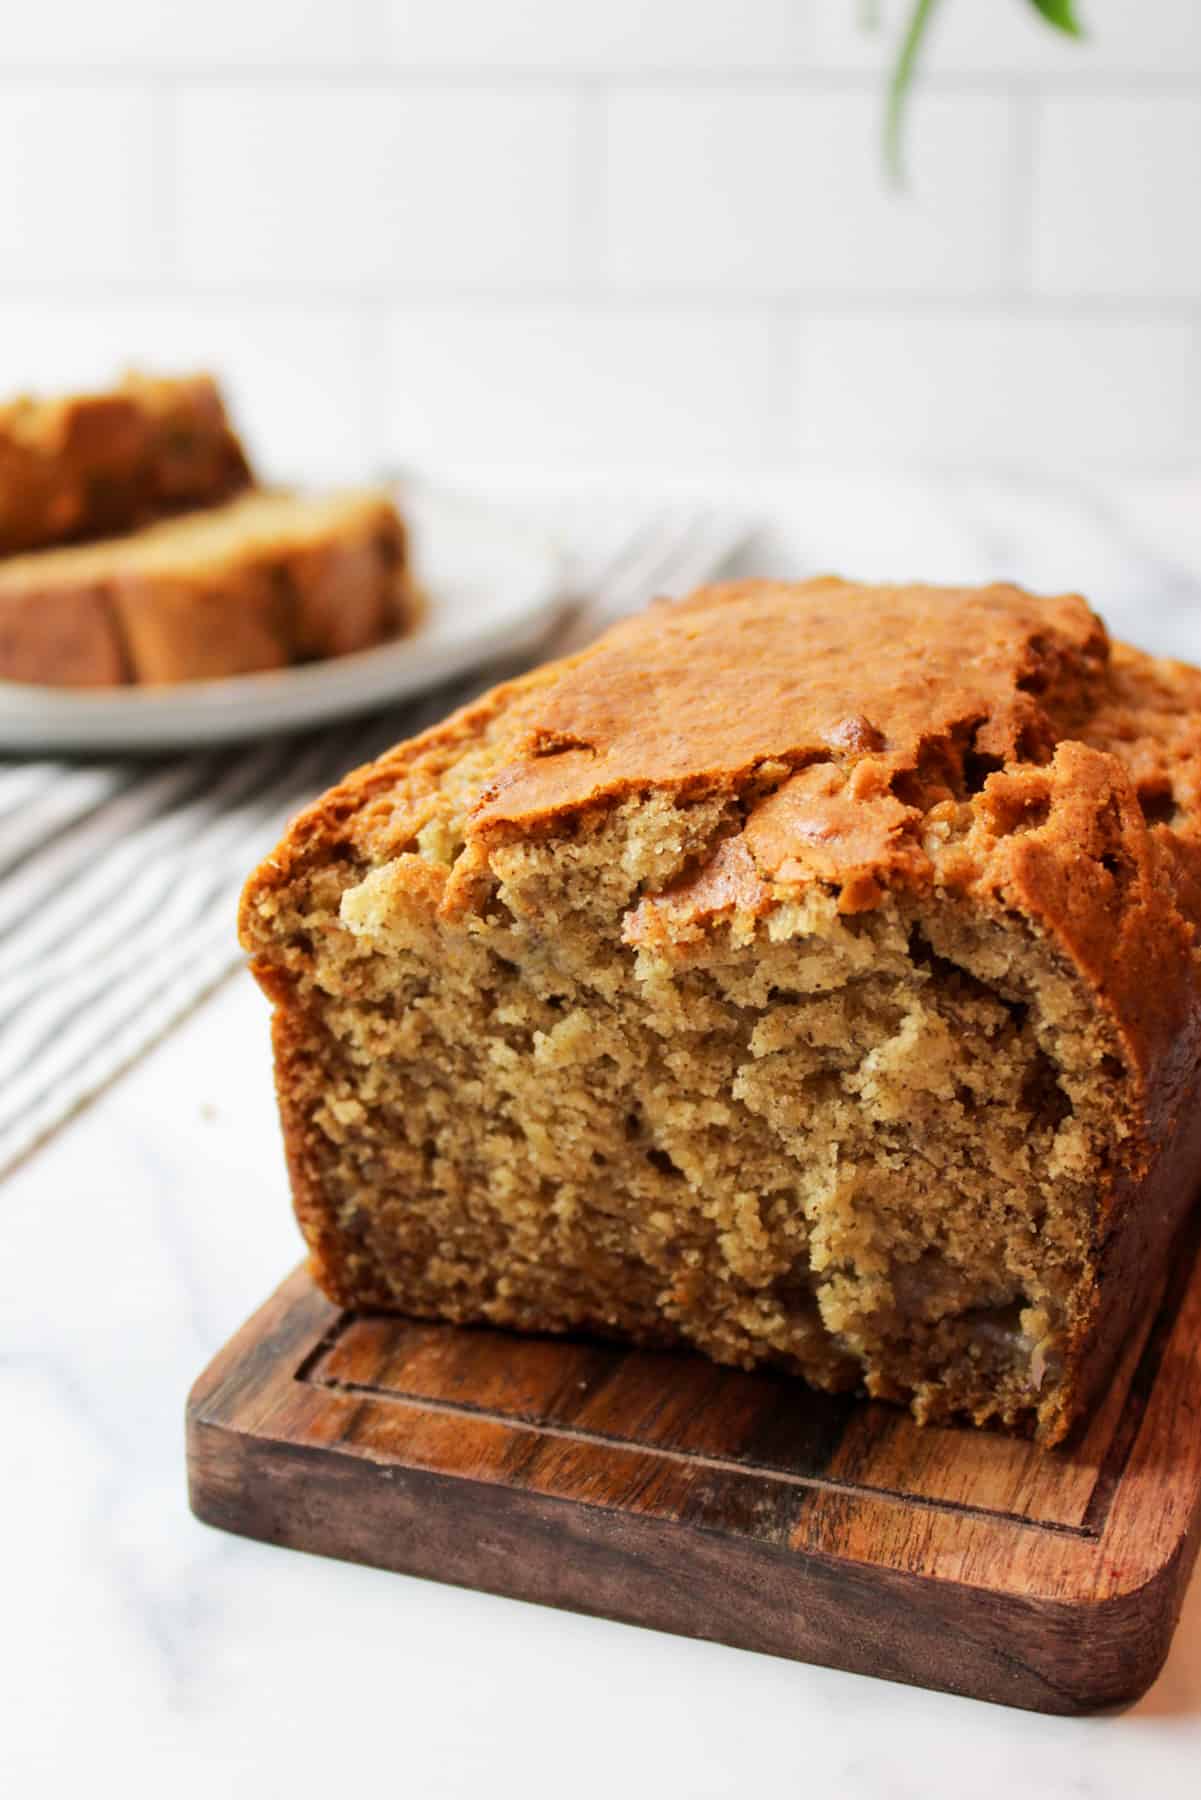 eggless banana bread on a wooden cutting baord with more sliced on a plate in the background.